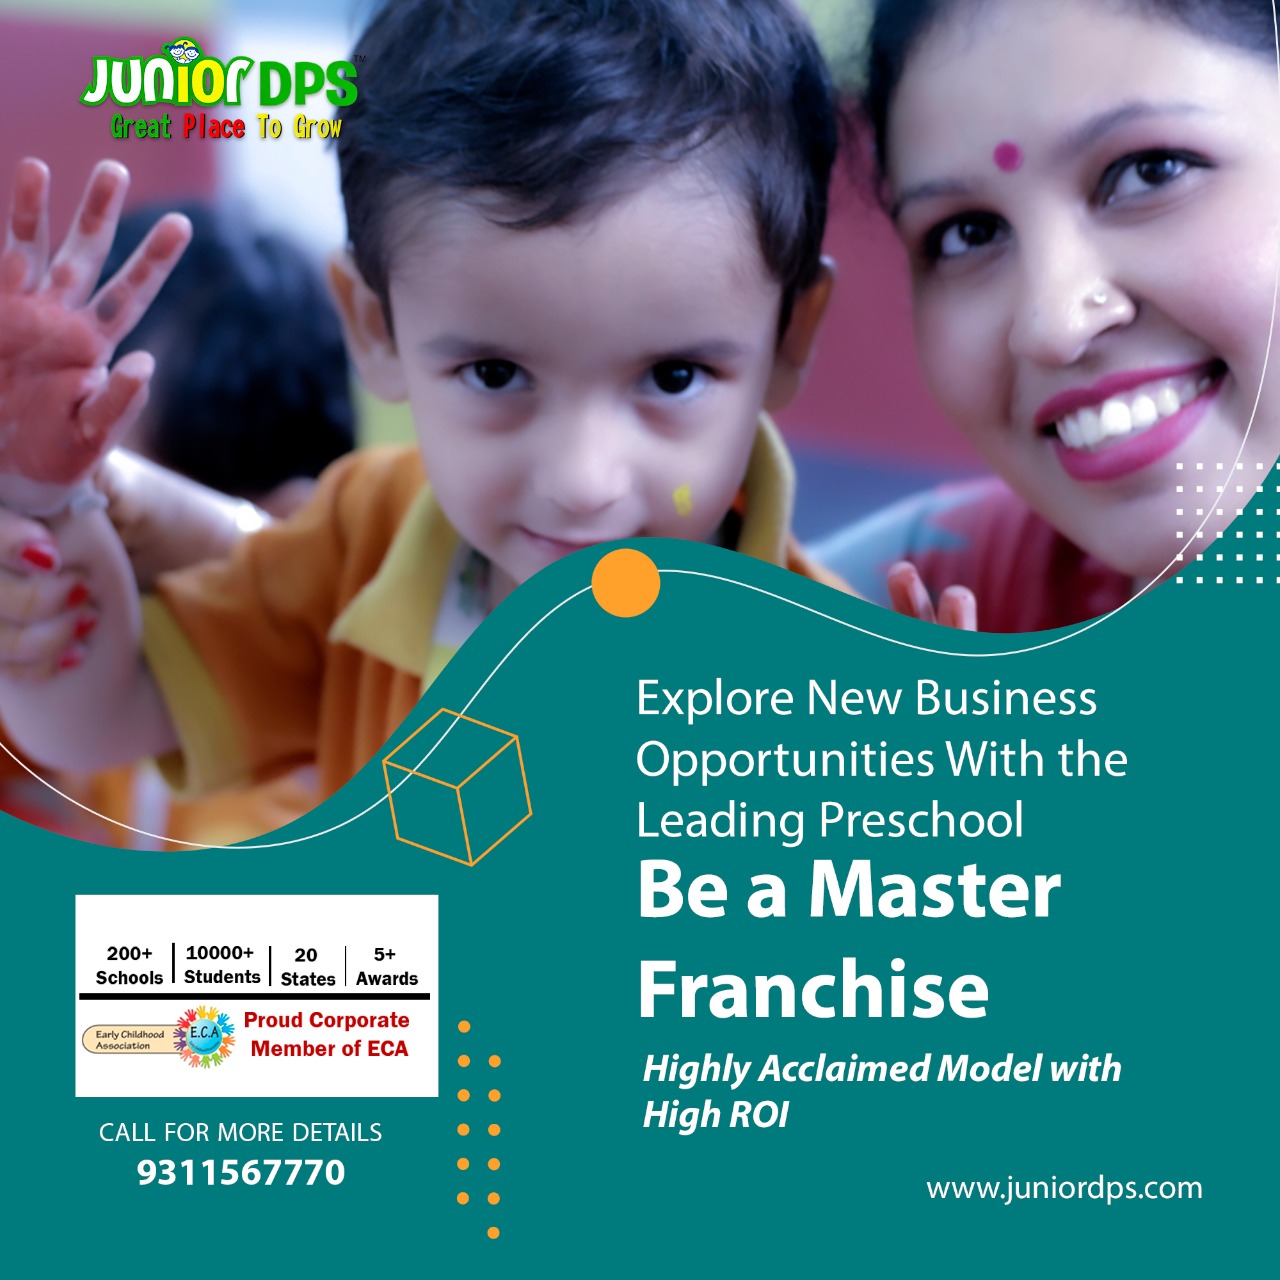 JuniorDPS Junior DPS is a chain of preschools whose commitment and determination towards delivering high-quality education and appropriate nurturing to children has ascended its name to the national level.                                                             by JuniorDps123